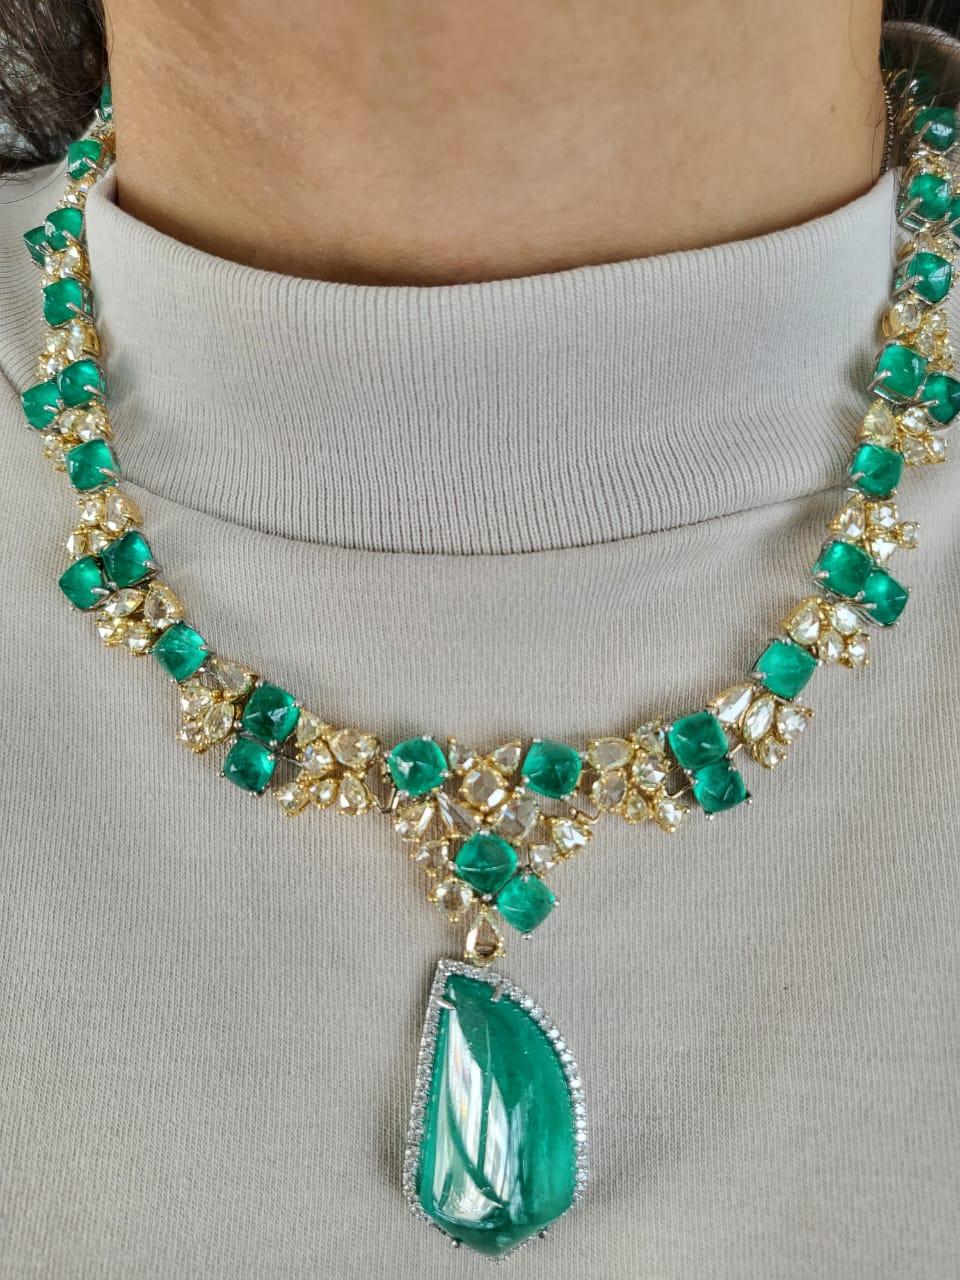 A very gorgeous and one of a kind, Emerald Choker Drop Necklace set in 18K Gold & Diamonds. The weight of the Emerald Sugarloafs is 36.74 carats. The Emeralds are completely natural, without any treatment and is of Columbian origin. The weight of